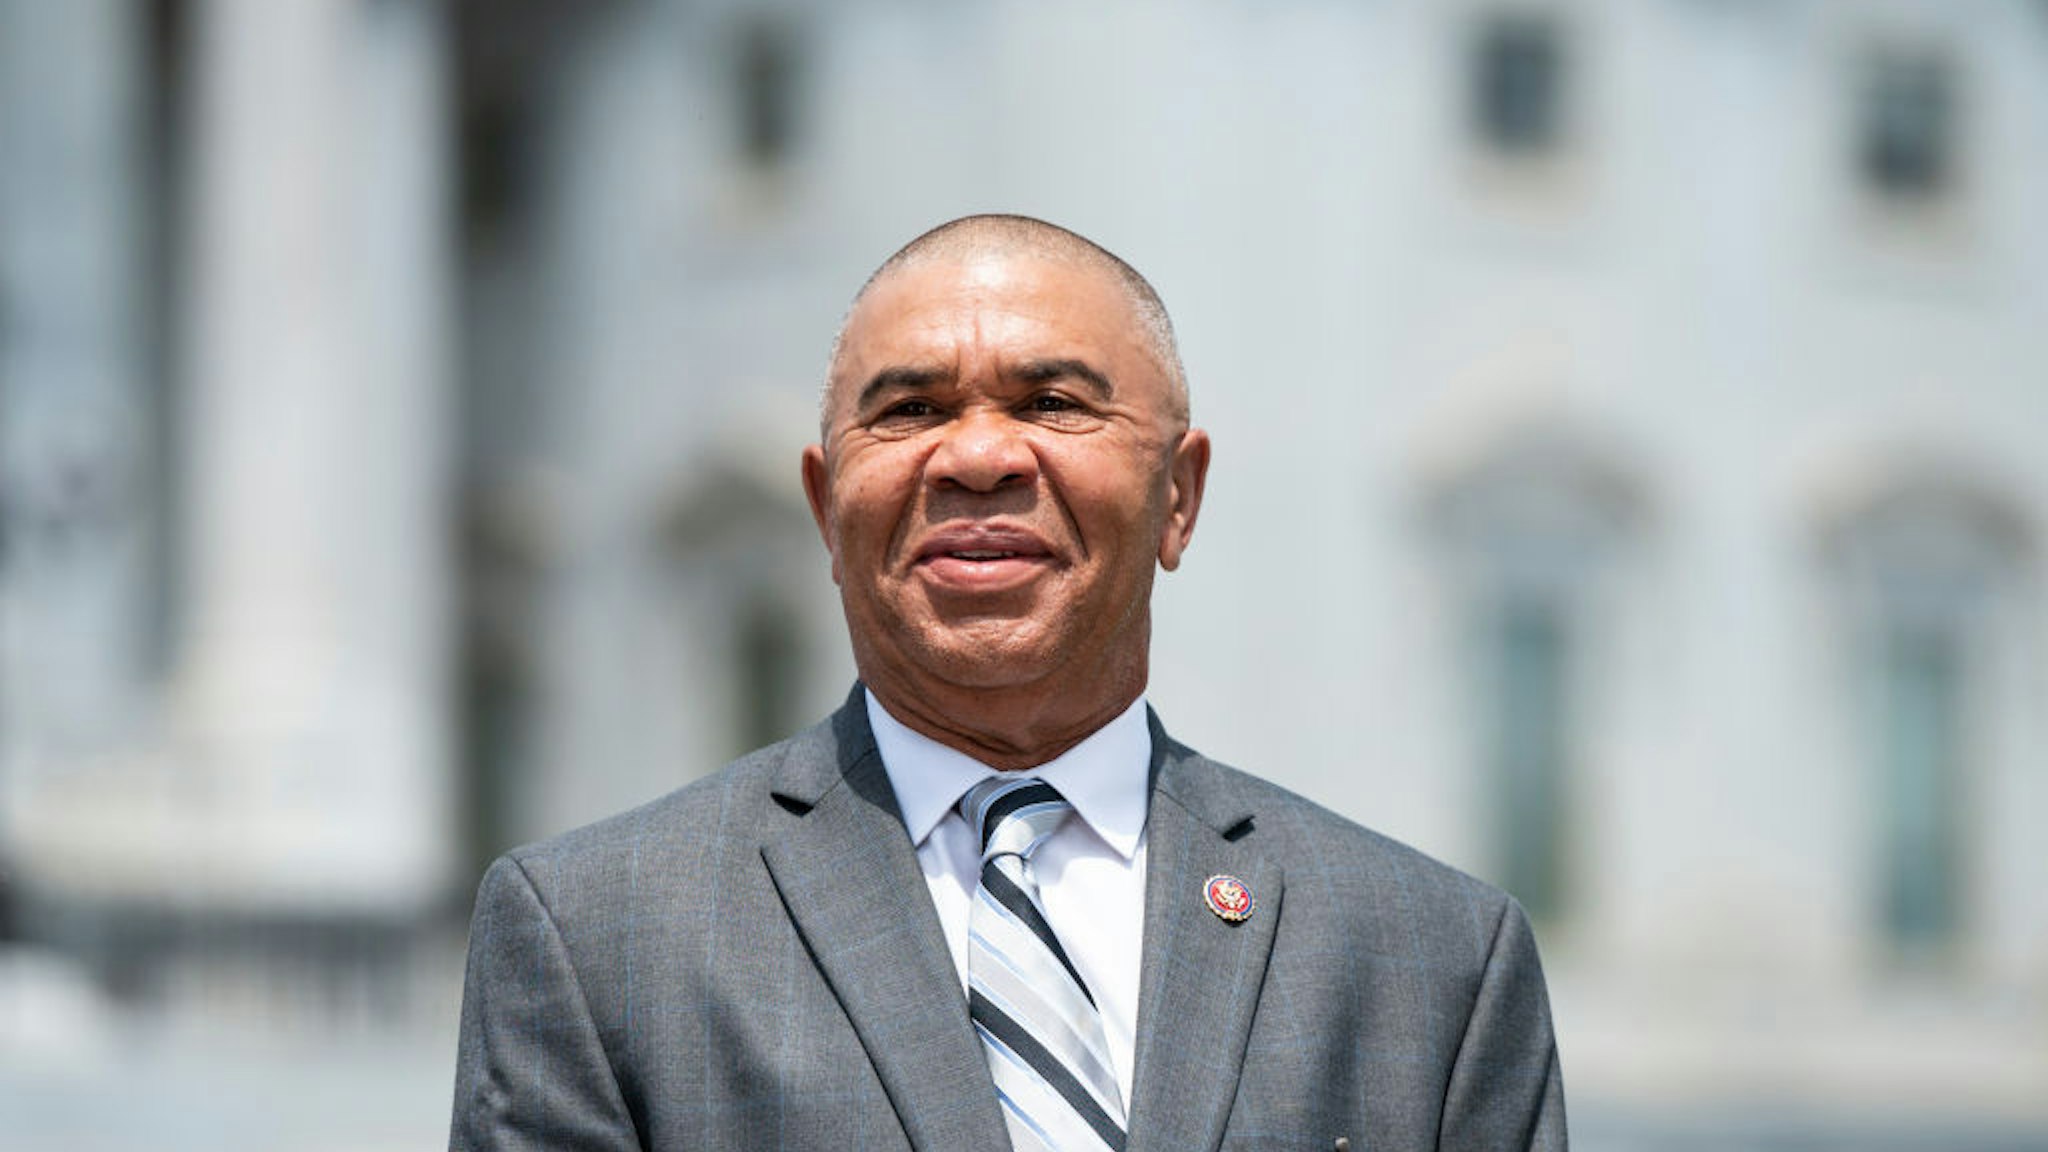 UNITED STATES - JUNE 25: Rep. William Lacy Clay, D-Mo., does a television news interview outside the Capitol before the vote on the George Floyd Justice in Policing Act of 2020 on Thursday, June 25, 2020.